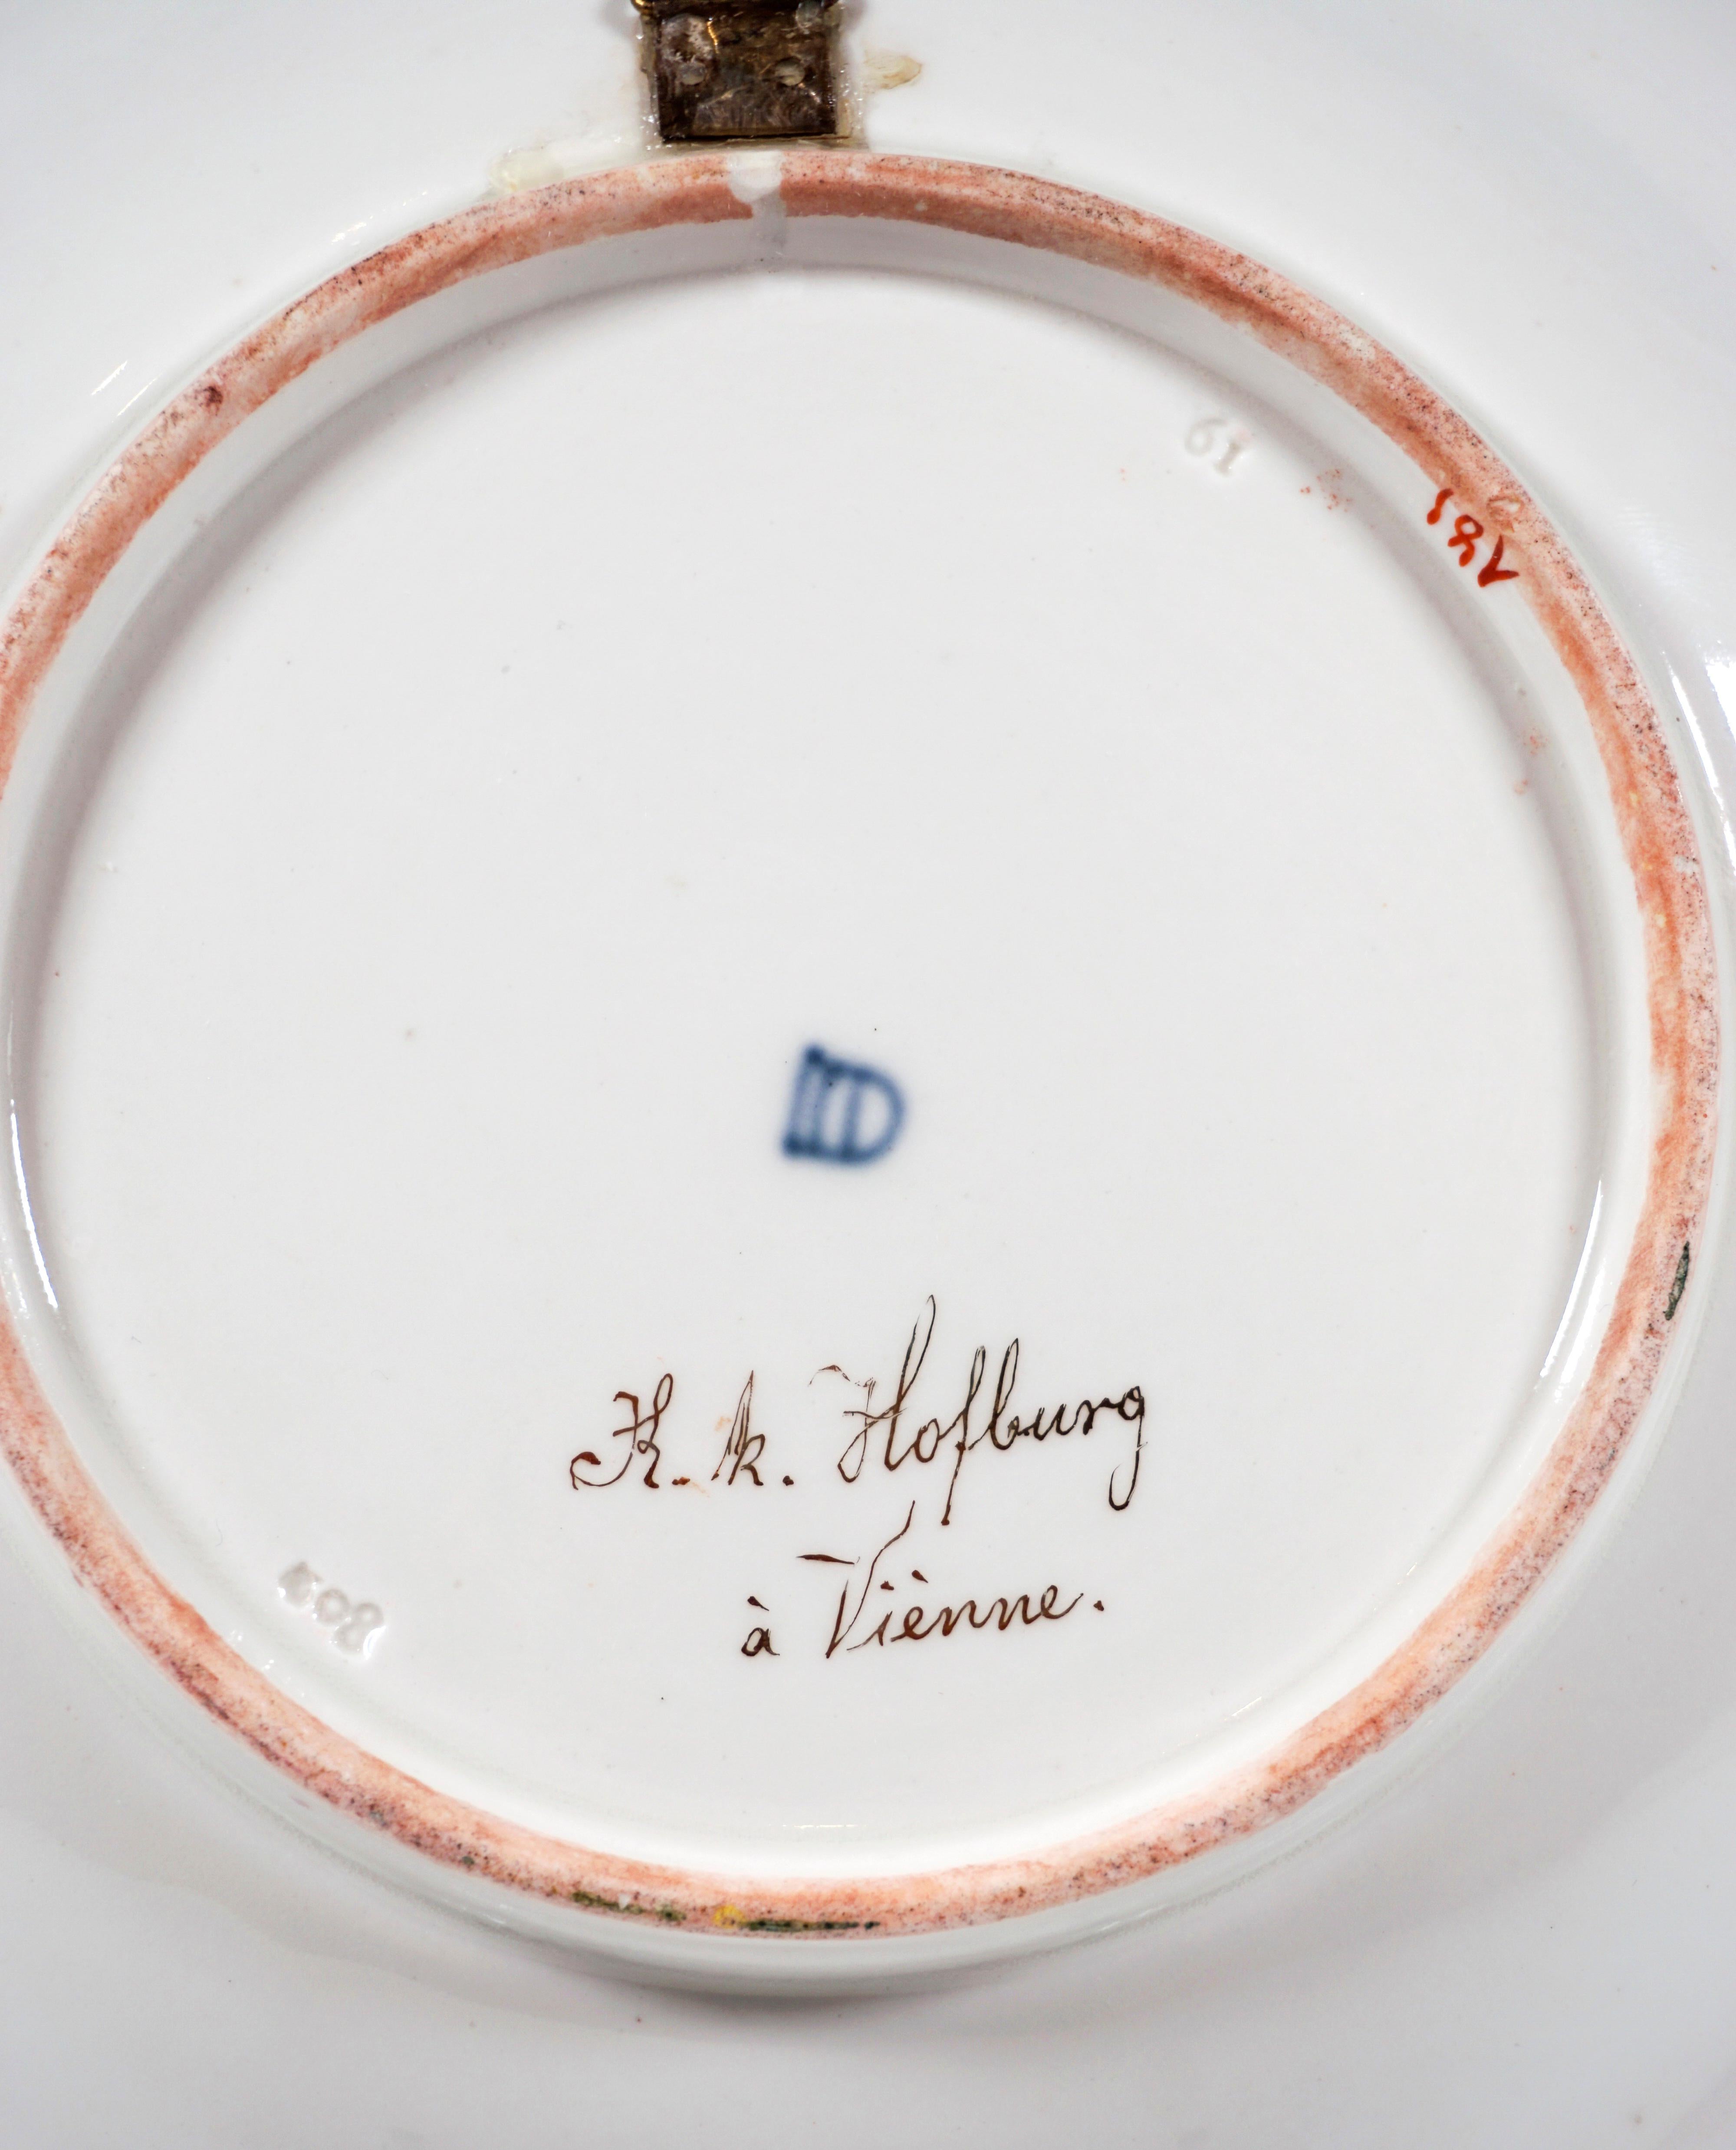 Viennese Imperial Porcelain Splendour Plate, 'K.k. Hofburg Á Vienne', 1802 In Good Condition For Sale In Vienna, AT